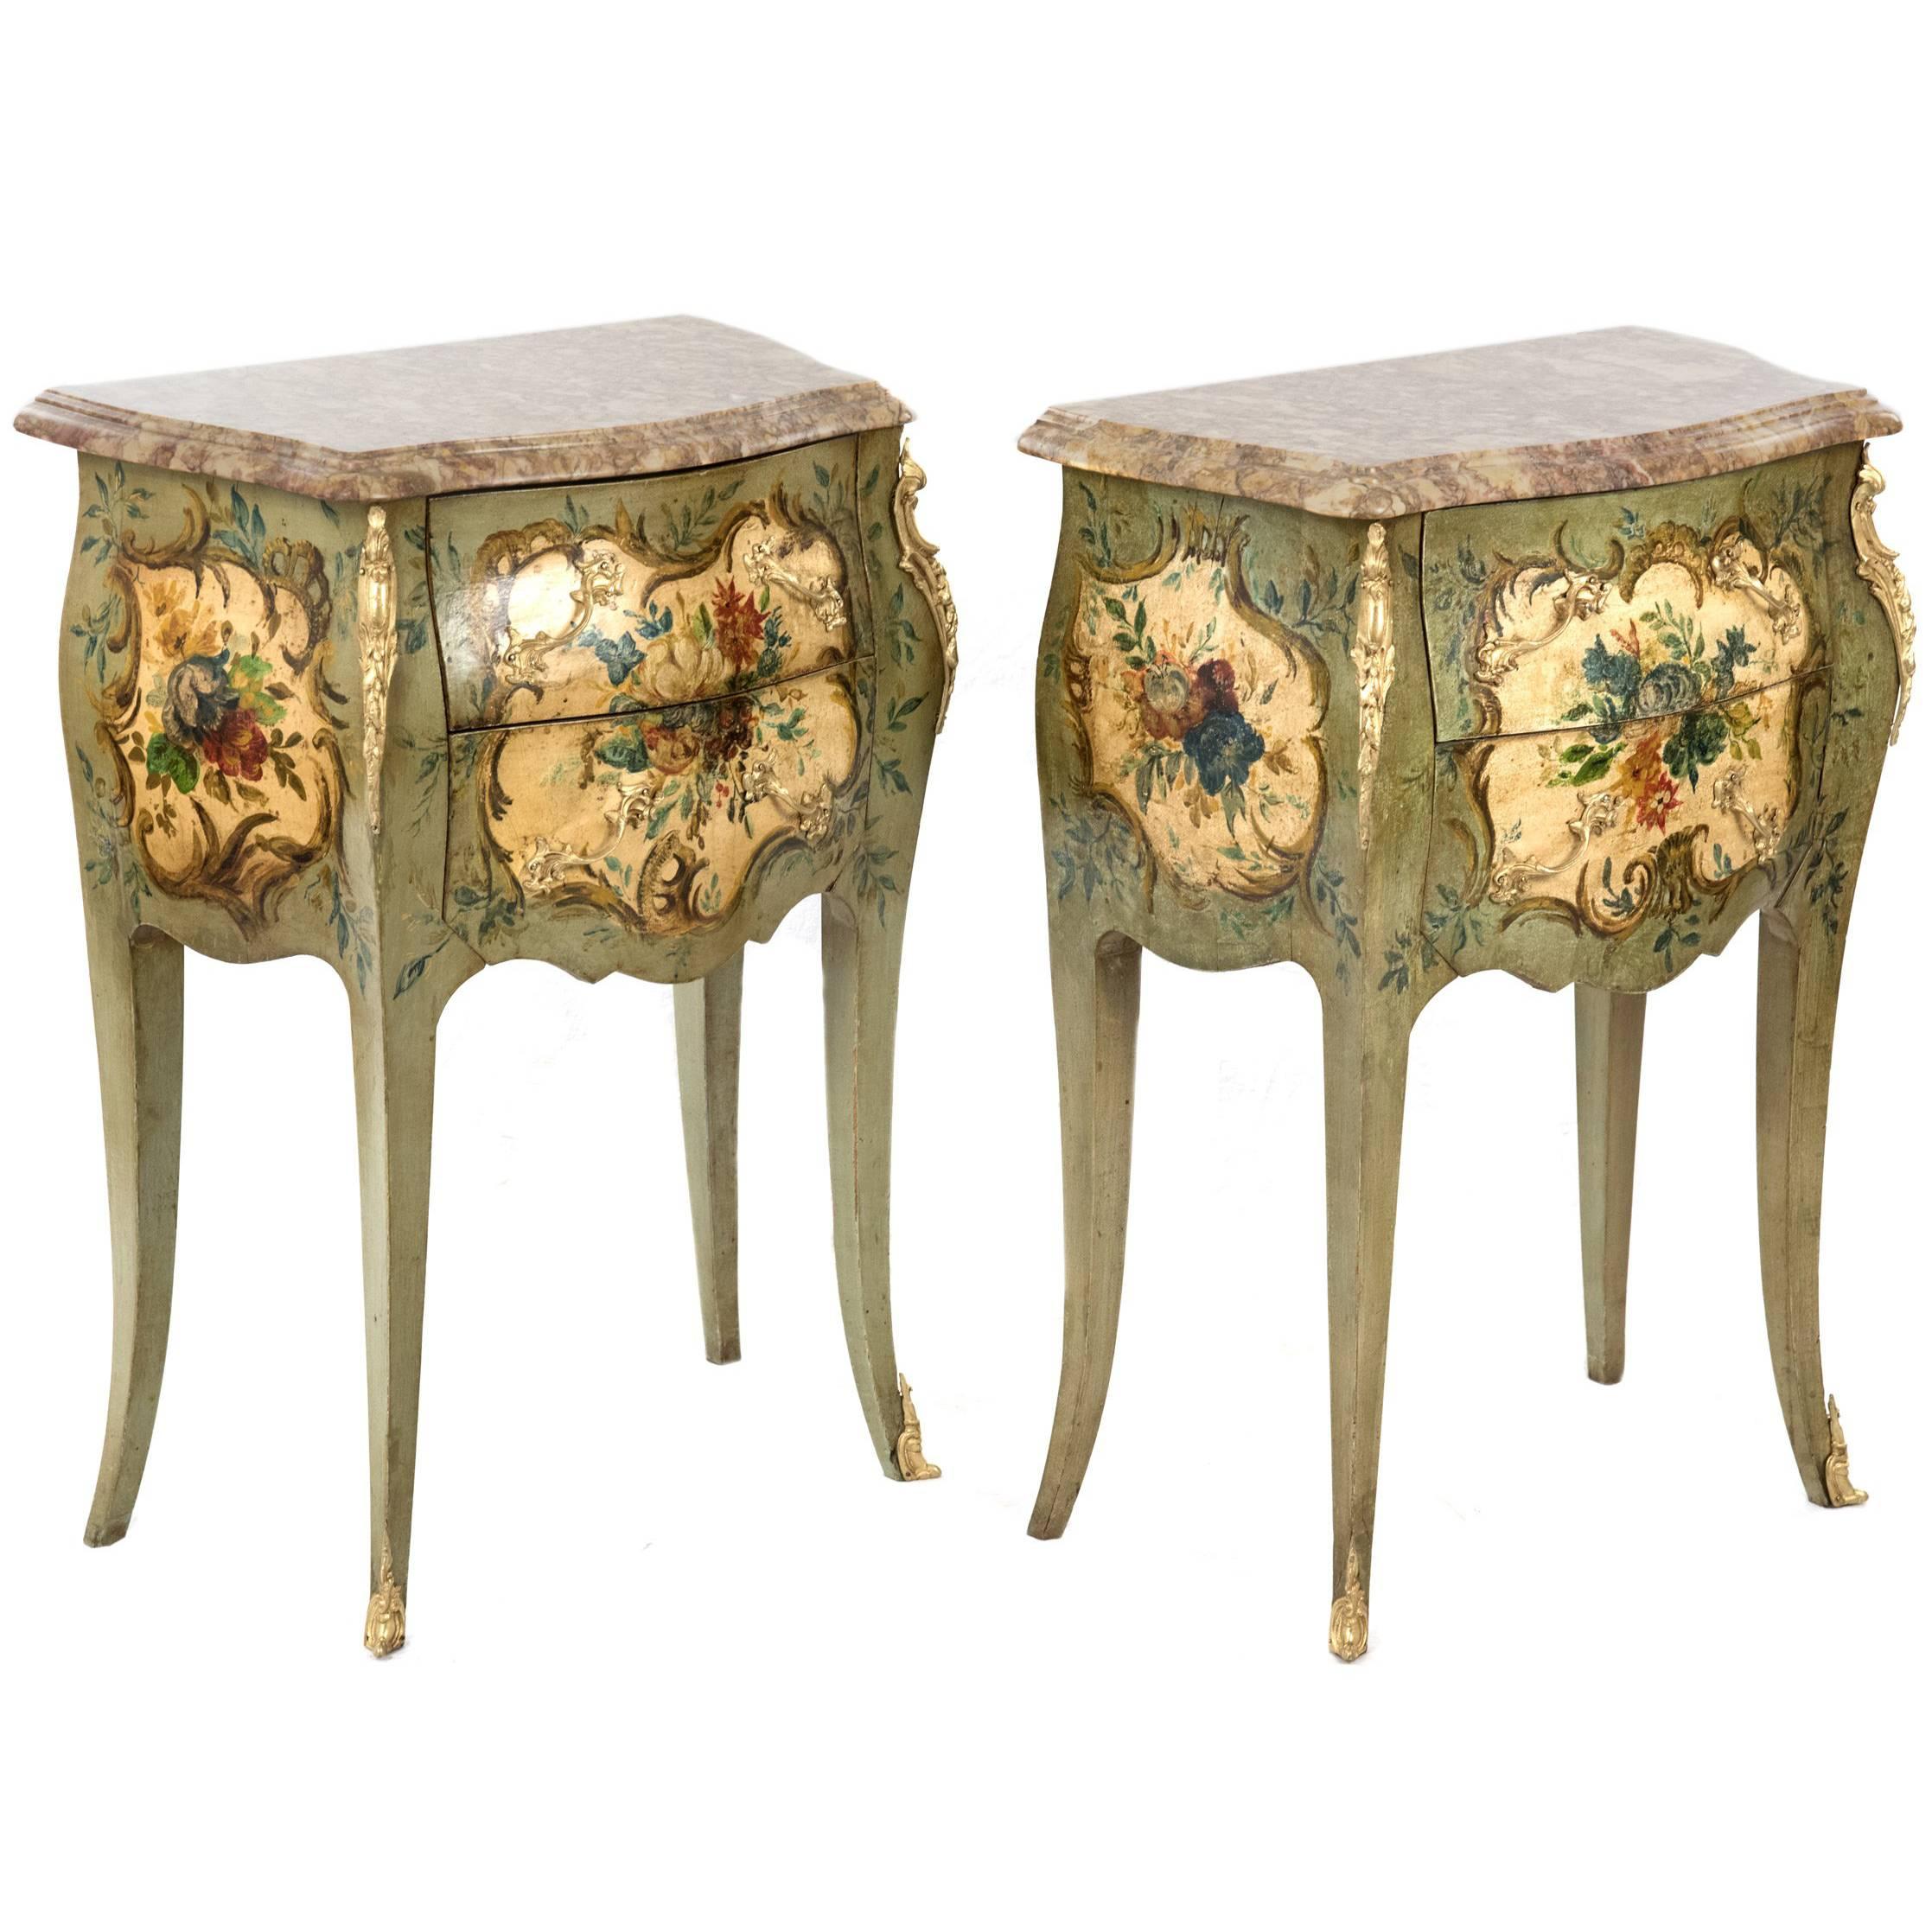 French, Louis XVI Style Painted and Marble-Topped Nightstands